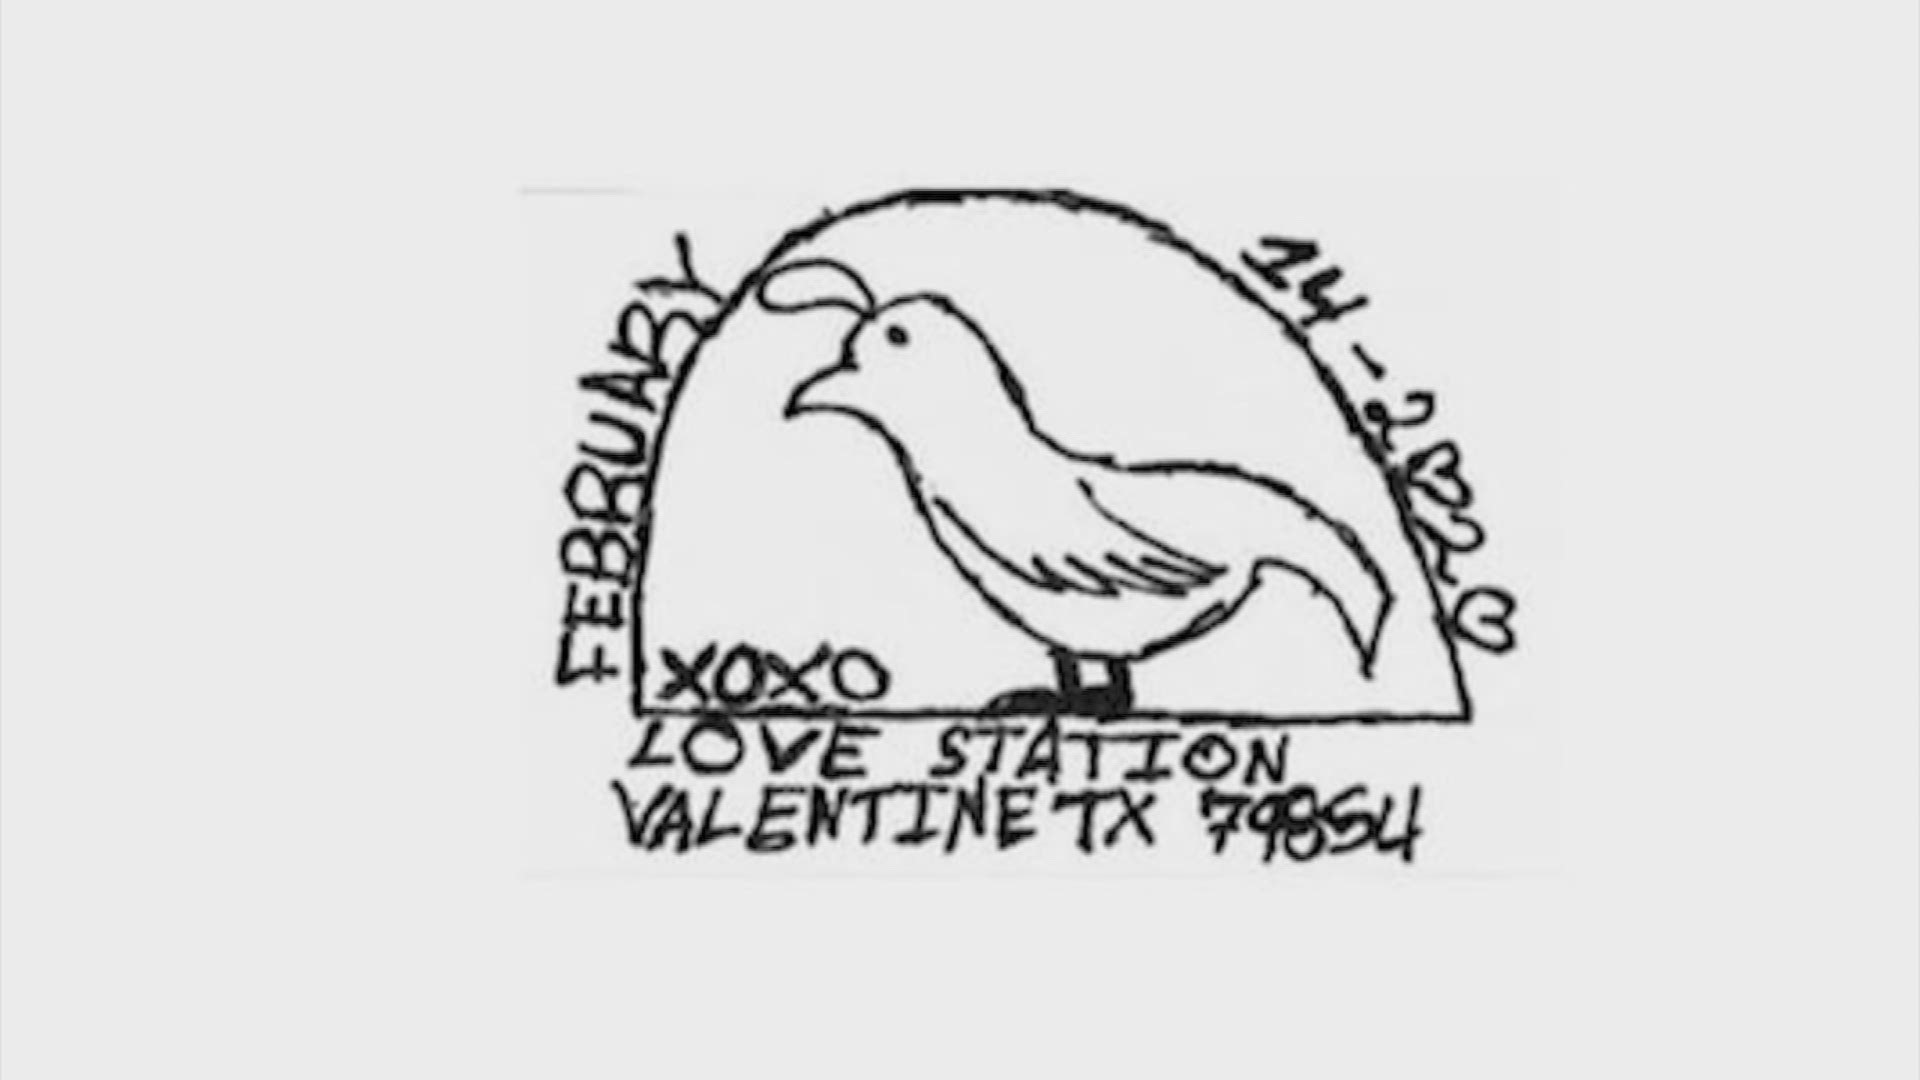 This custom postmark is a way to show your adoration this Valentine's Day.